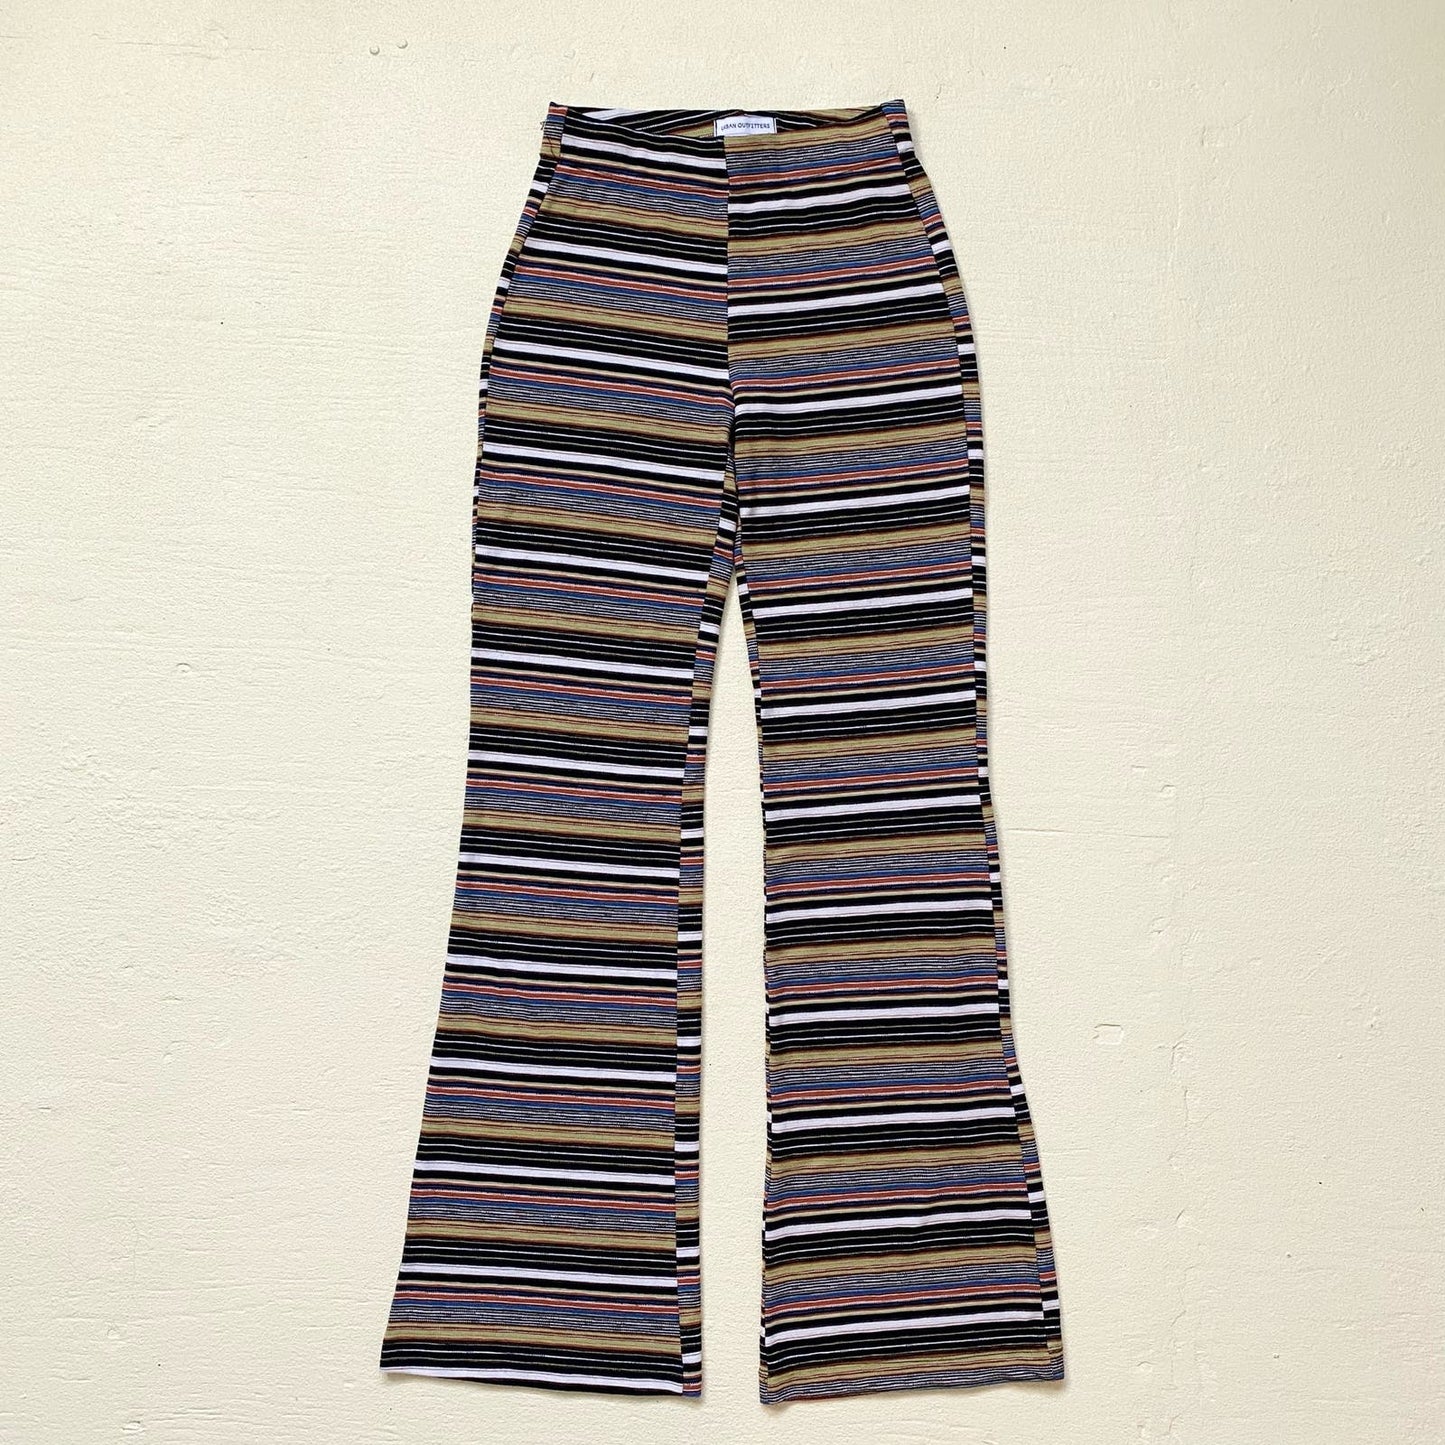 Secondhand Urban Outfitters Striped Knit Flare Pants, Size Small